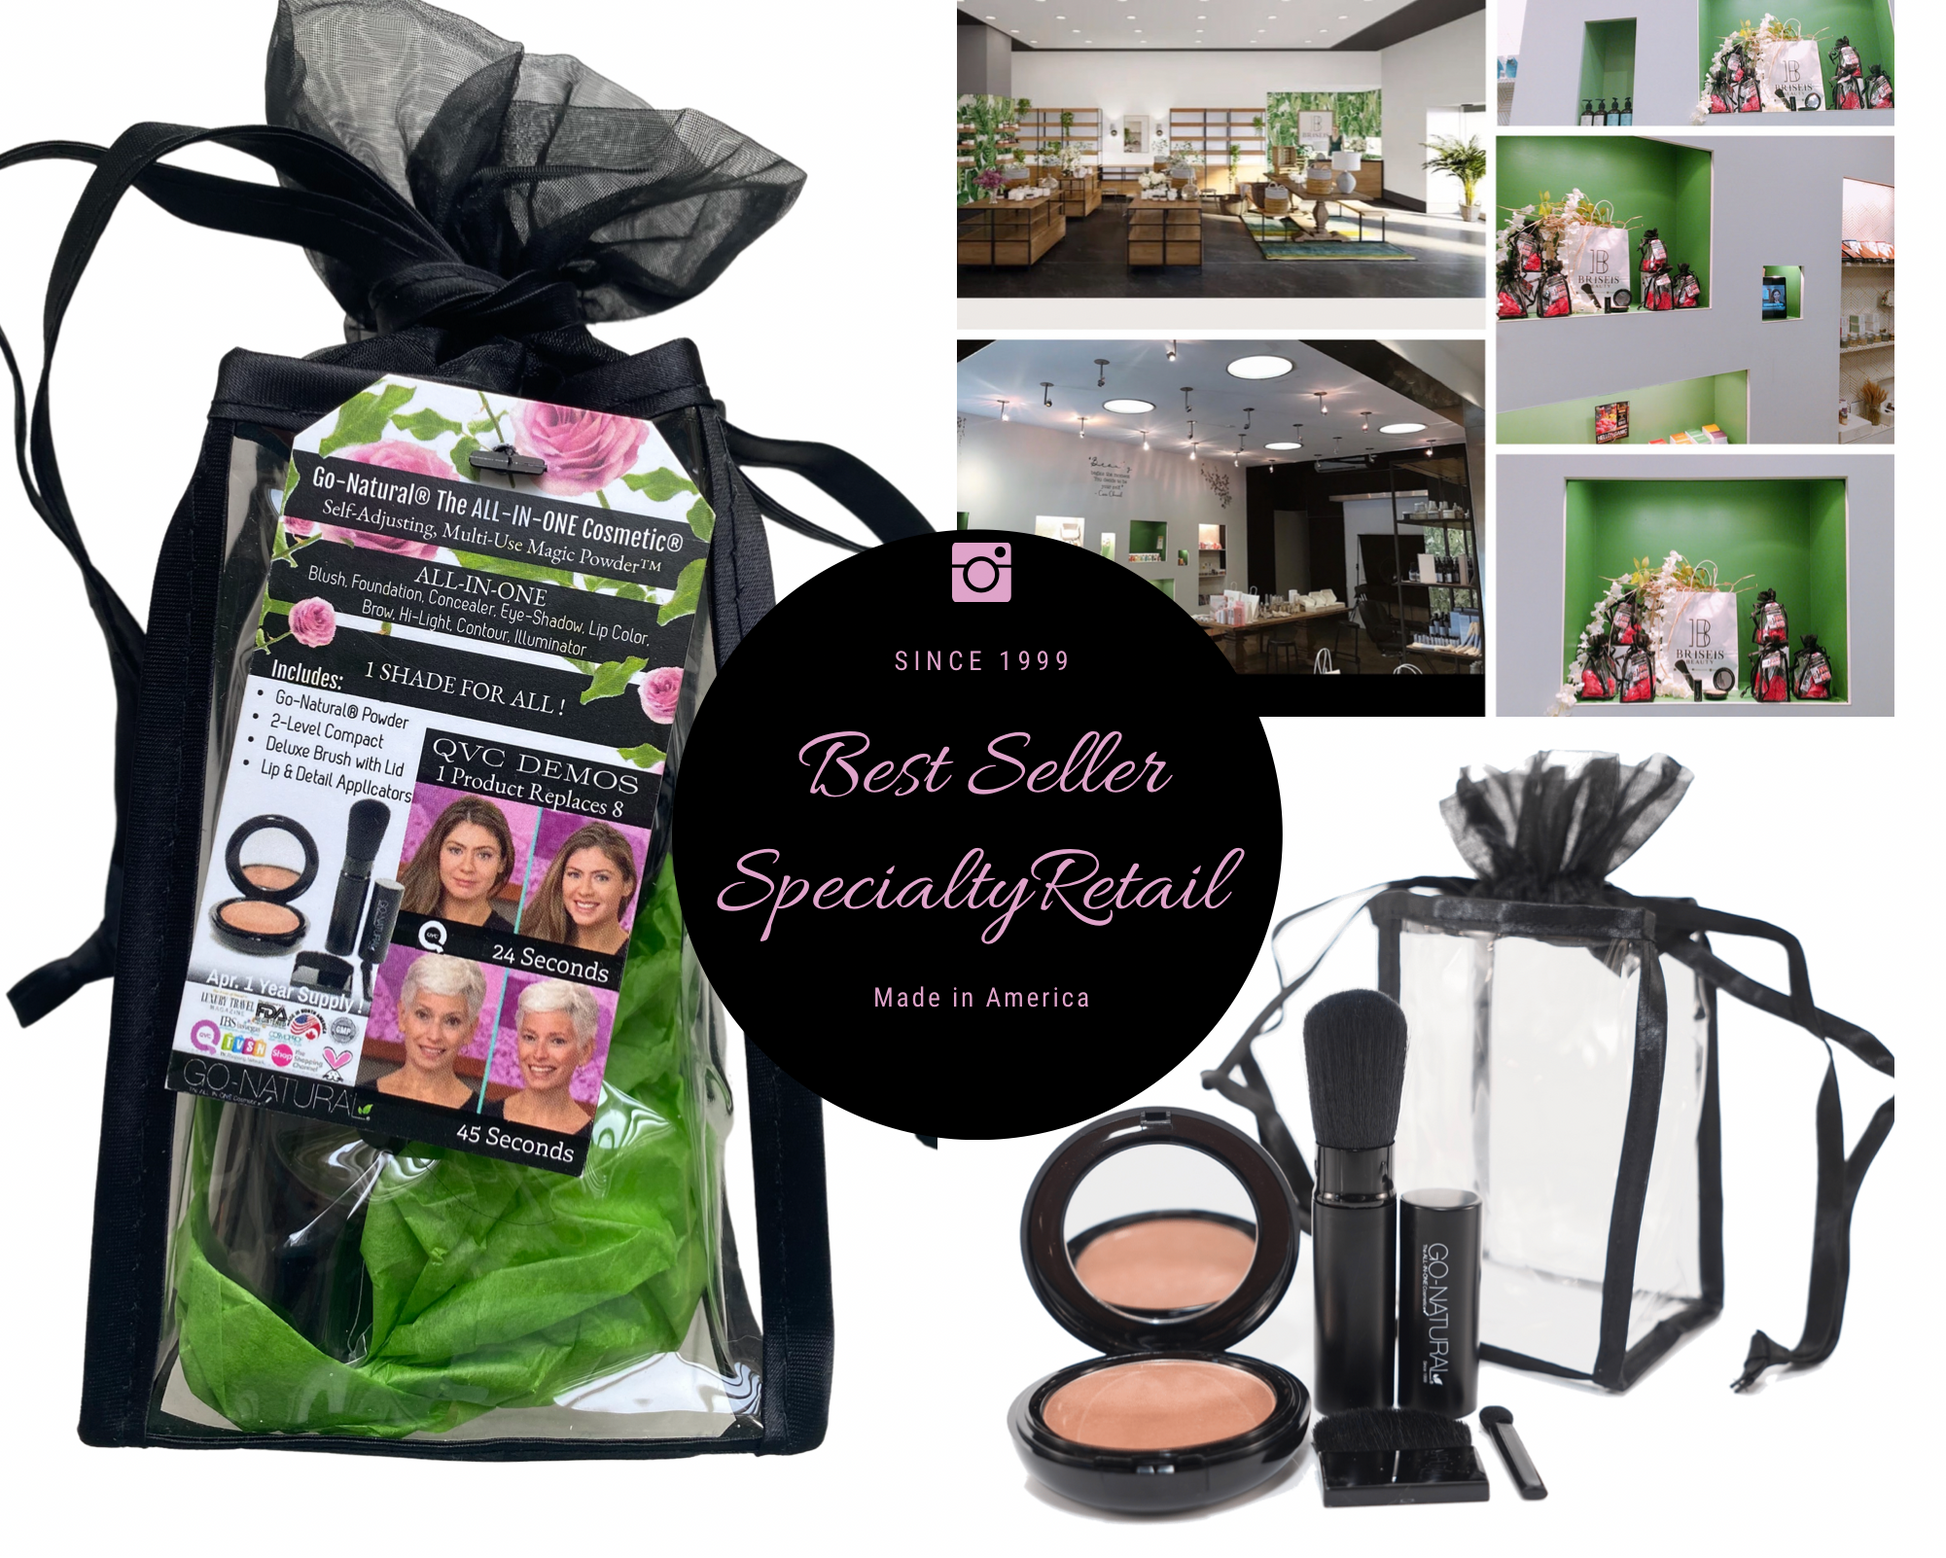 SPECIALTY RETAIL BEST SELLER - RETAIL PACKAGING - Wholesale Best Seller GO-NATURAL® ALL-IN-ONE Cosmetic® 1-Shade Multi-Use "Magic Powder" ™ Manufacturer Direct Specialty Retail & Professional Beauty Exclusive  